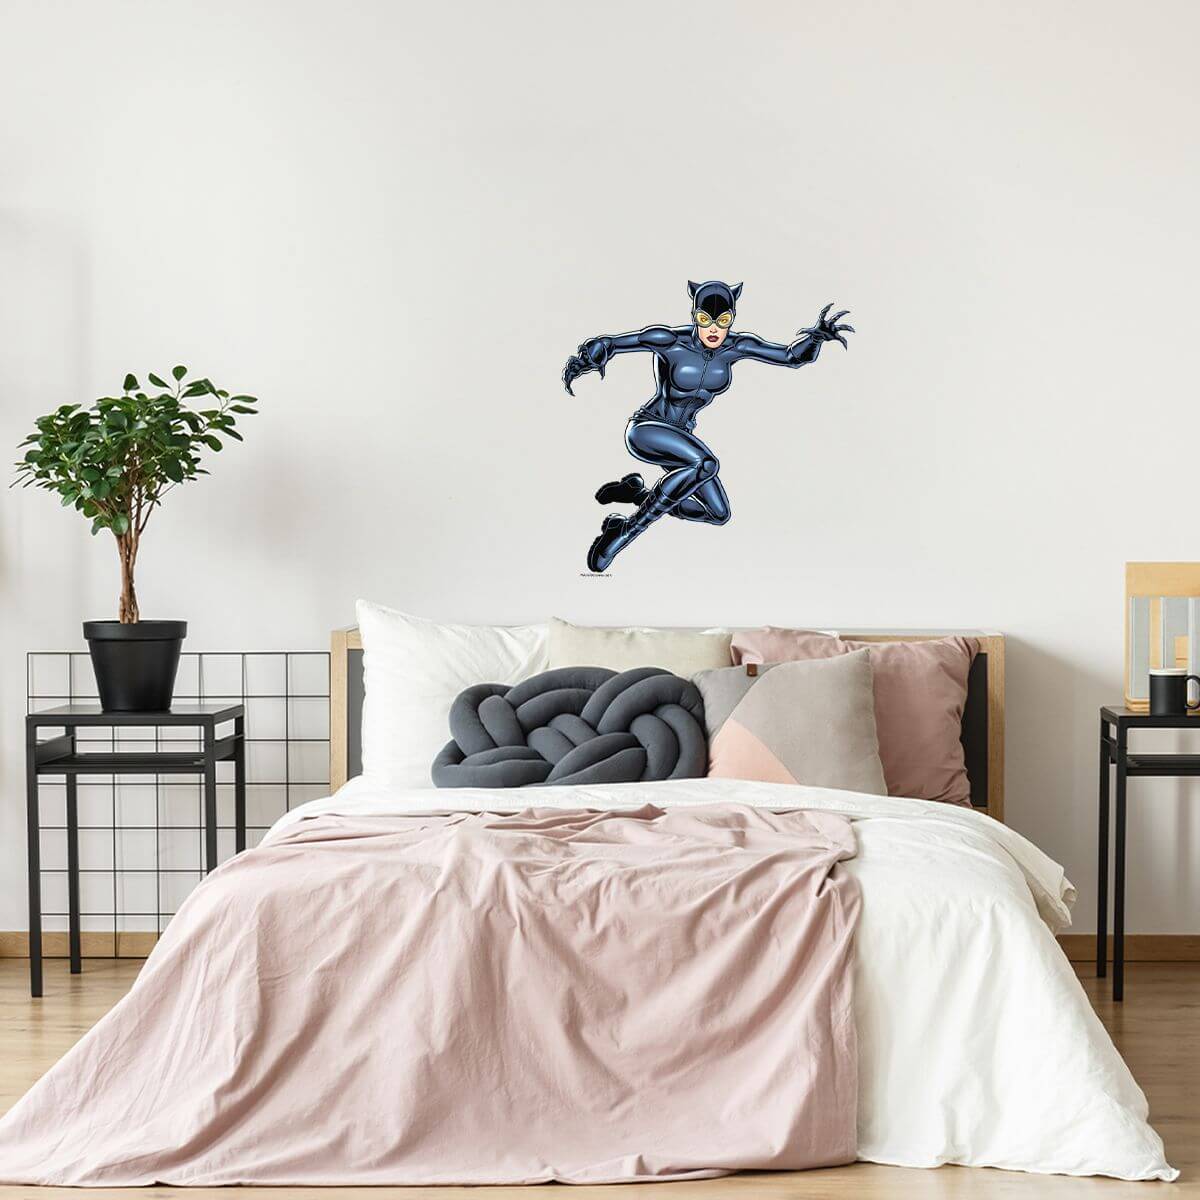 Kismet Decals Catwoman Leap Attack Licensed Wall Sticker - Easy DIY Justice League Home & Room Decor Wall Art - Kismet Decals